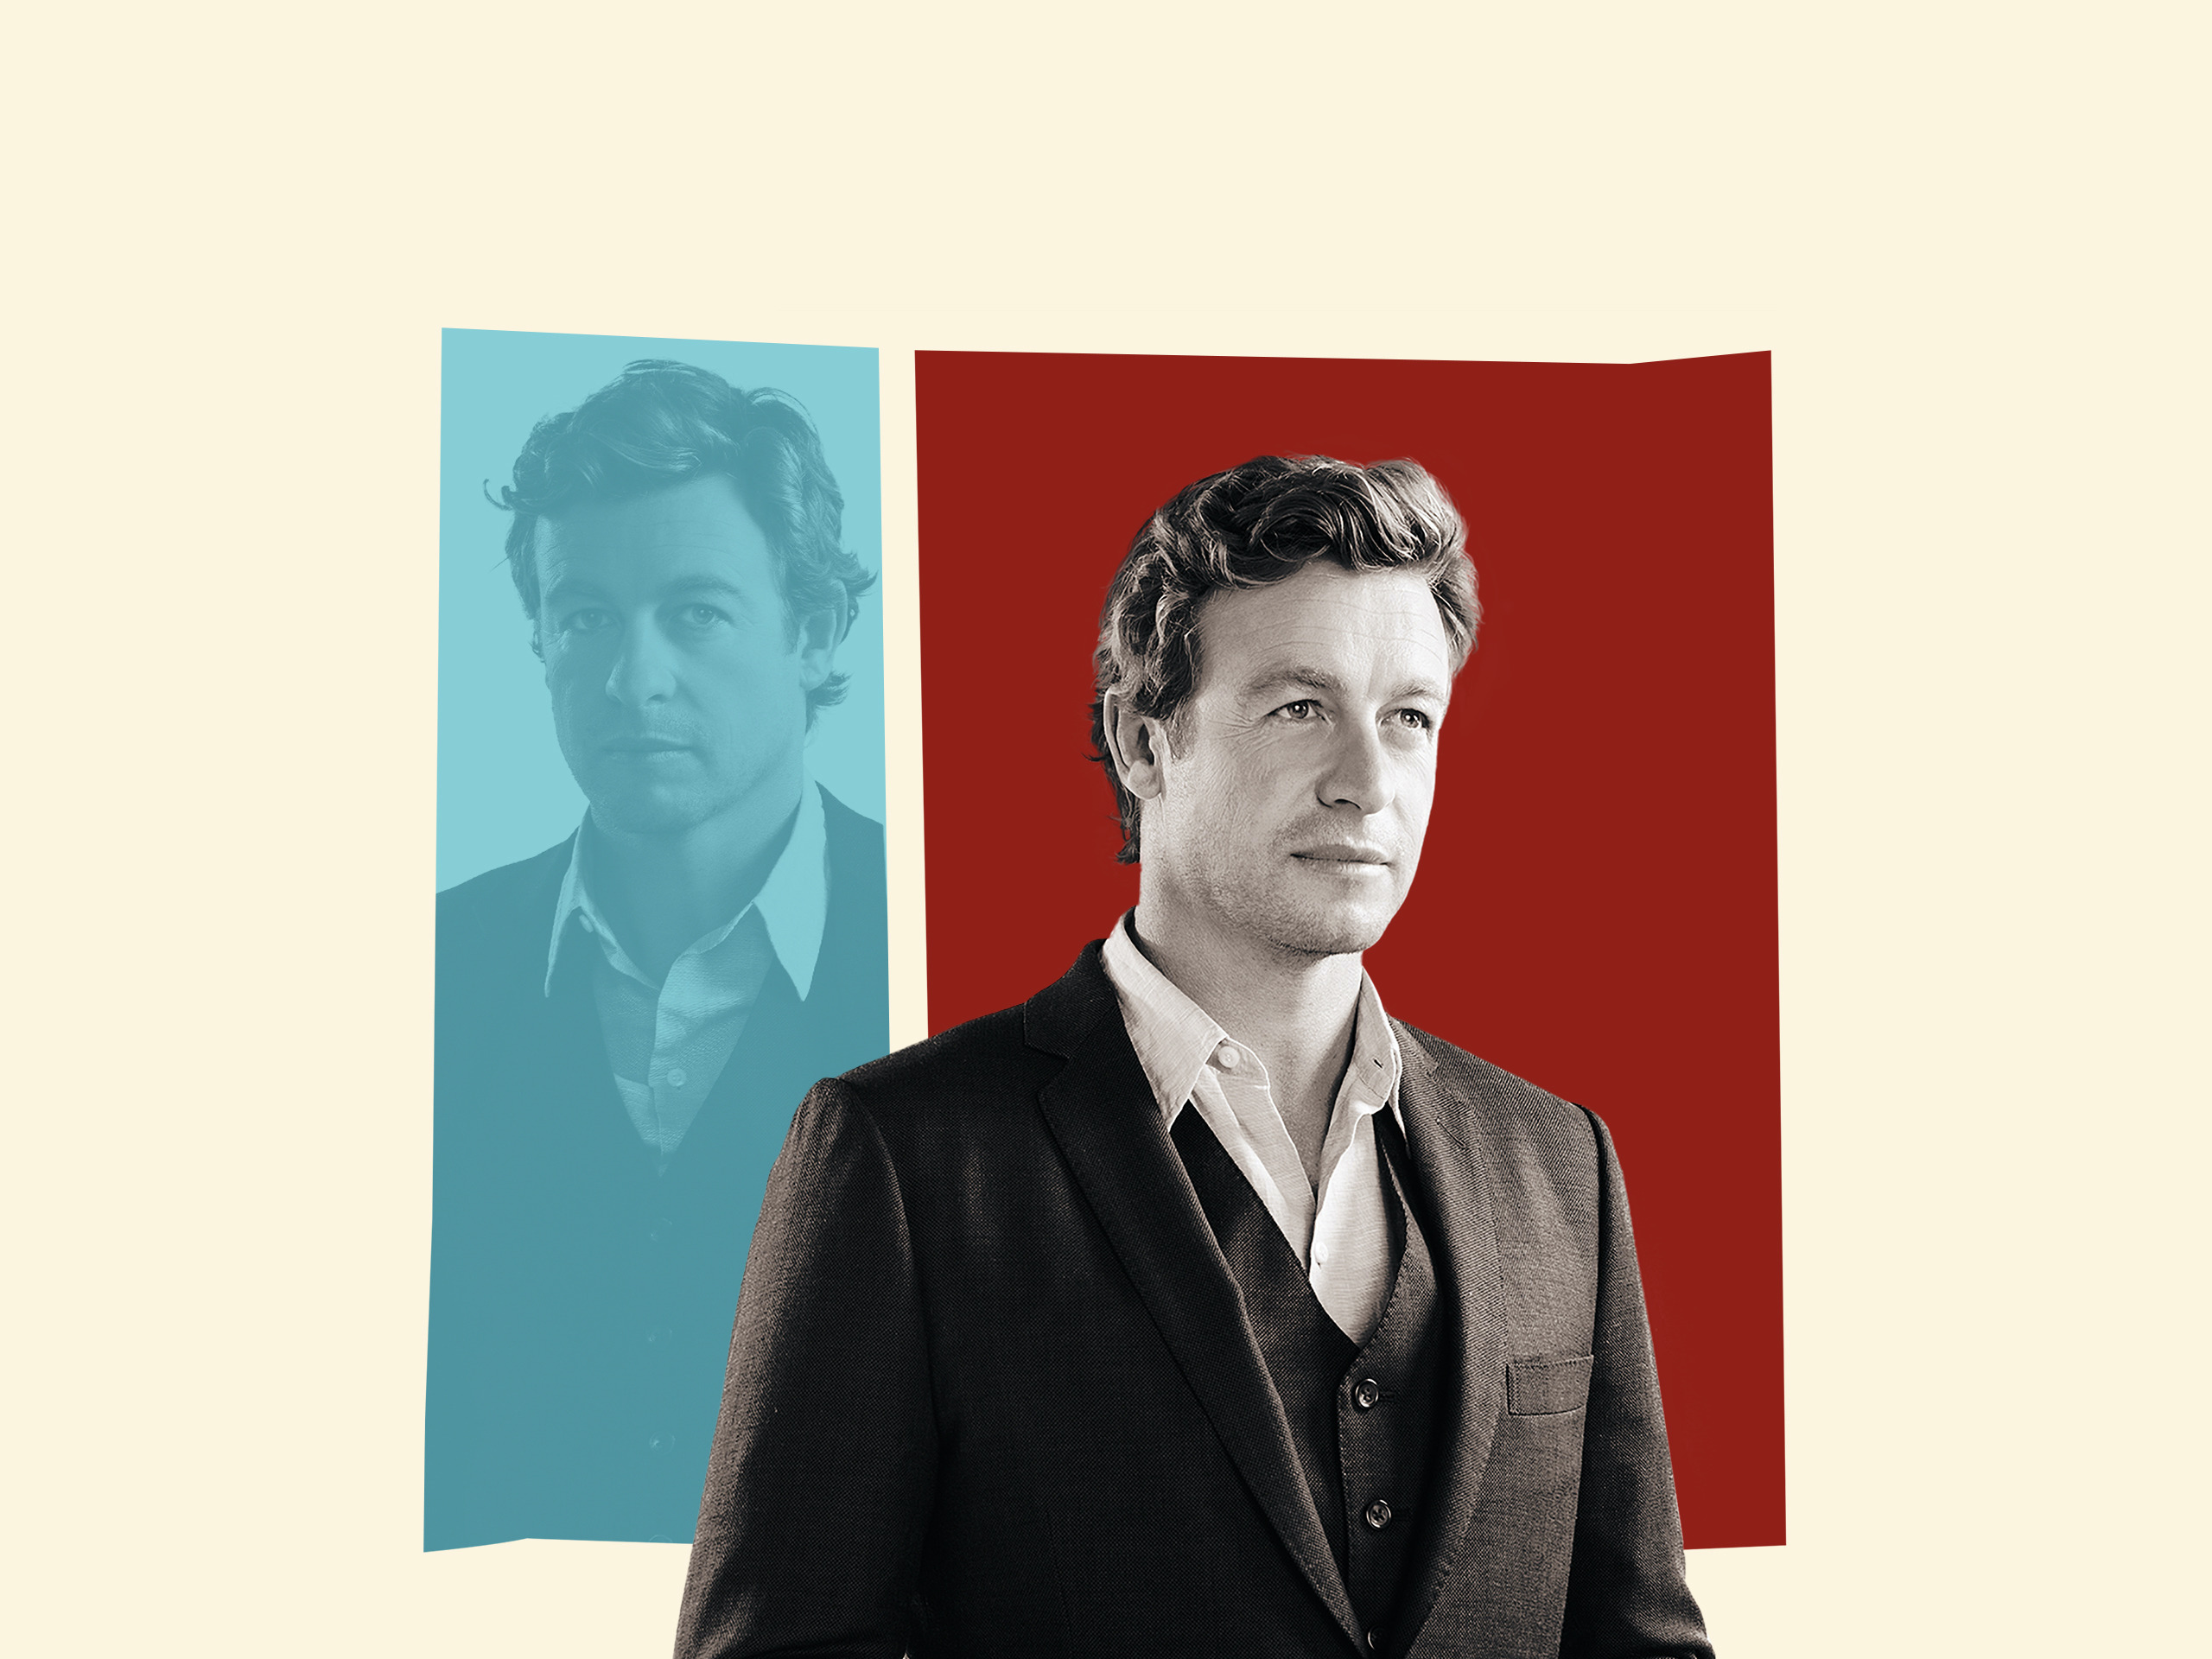 TV Show The Mentalist HD Wallpaper | Background Image